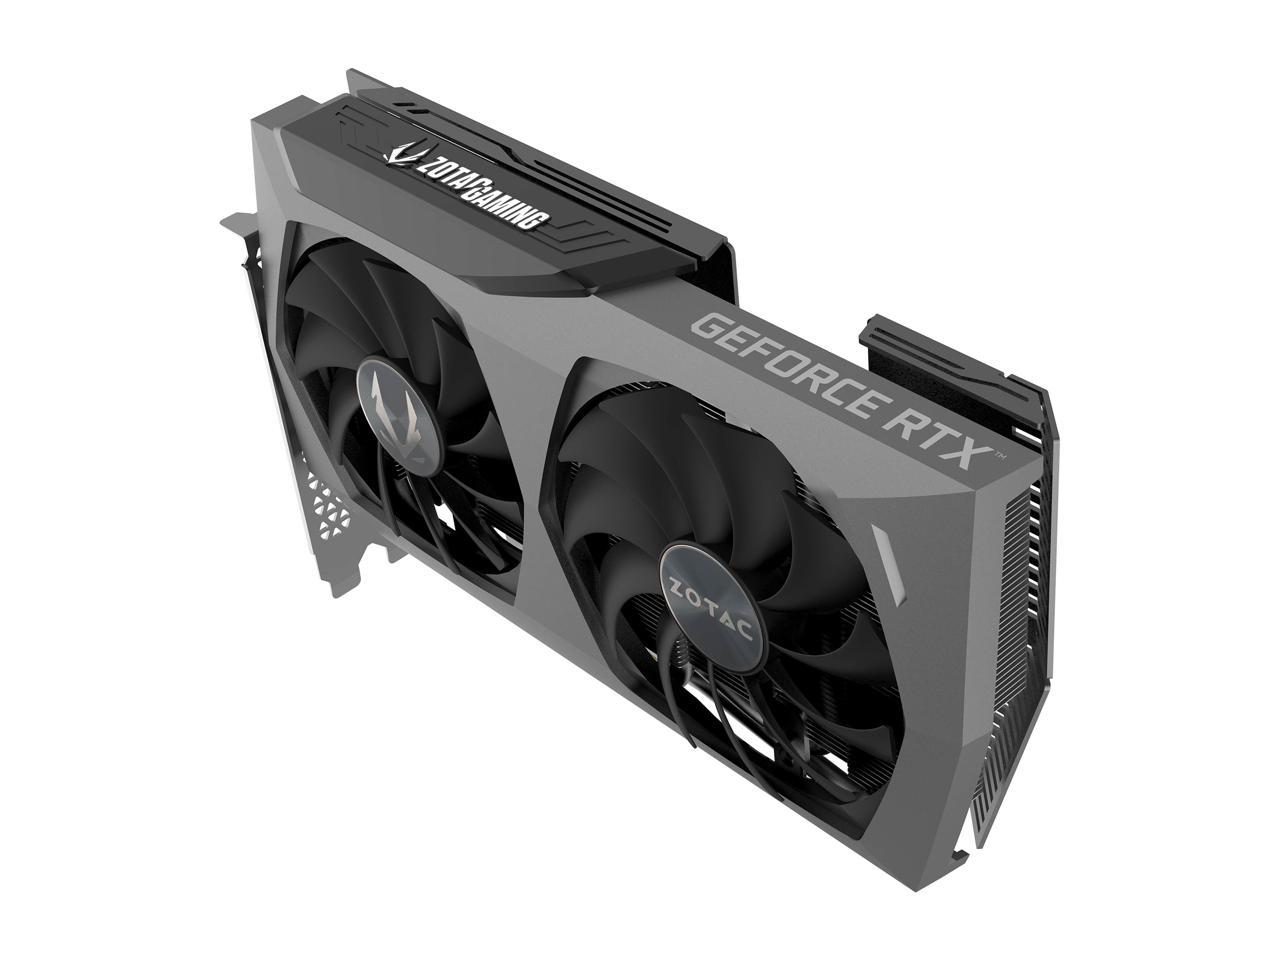 ZOTAC GAMING GeForce RTX 3070 Twin Edge OC LHR 8GB GDDR6 256-bit 14 Gbps PCIE 4.0 Gaming Graphics Card, IceStorm 2.0 Advanced Cooling, White LED Logo Lighting, ZT-A30700H-10PLHR